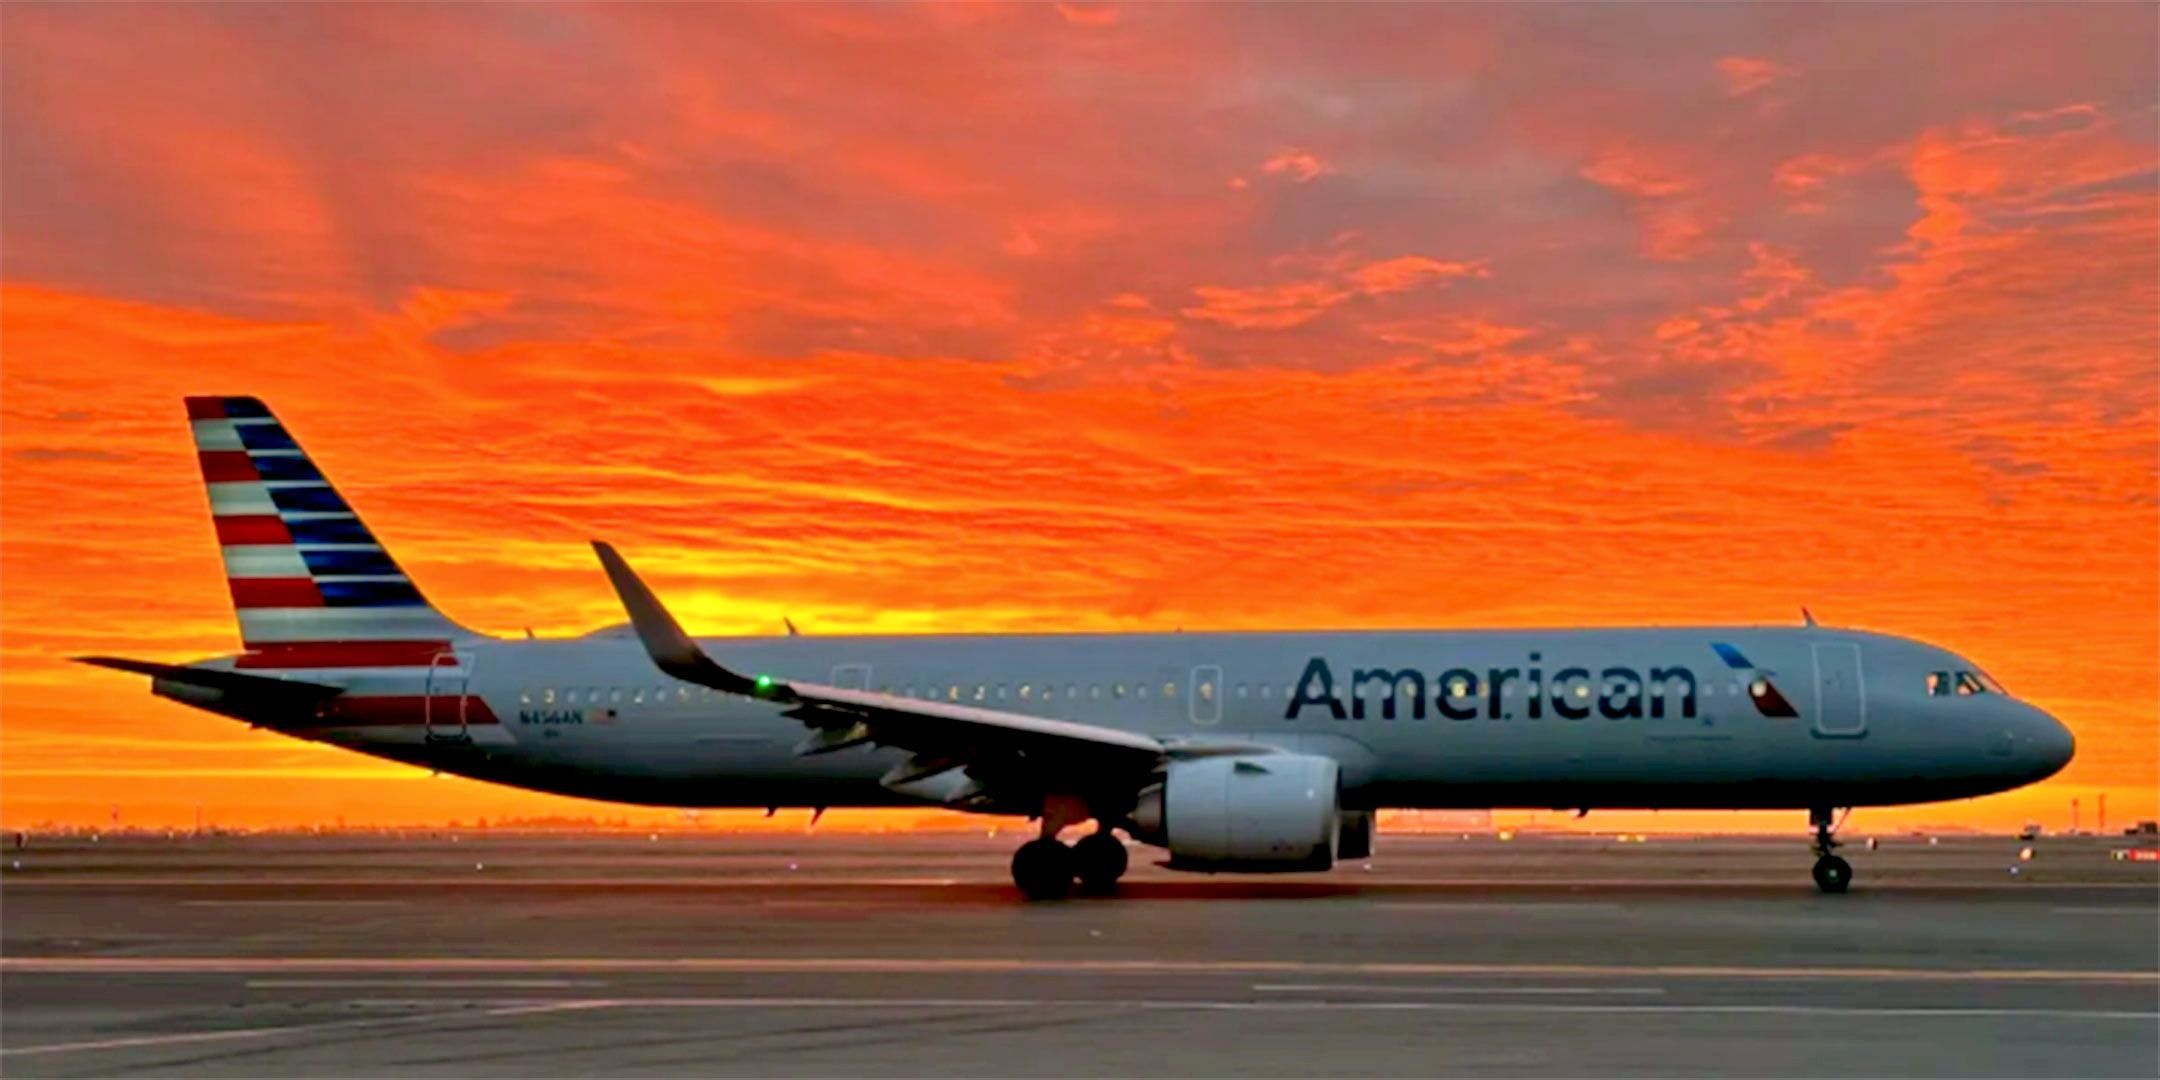 American Airlines to launch two new nonstop routes to Jamaica and Bermuda